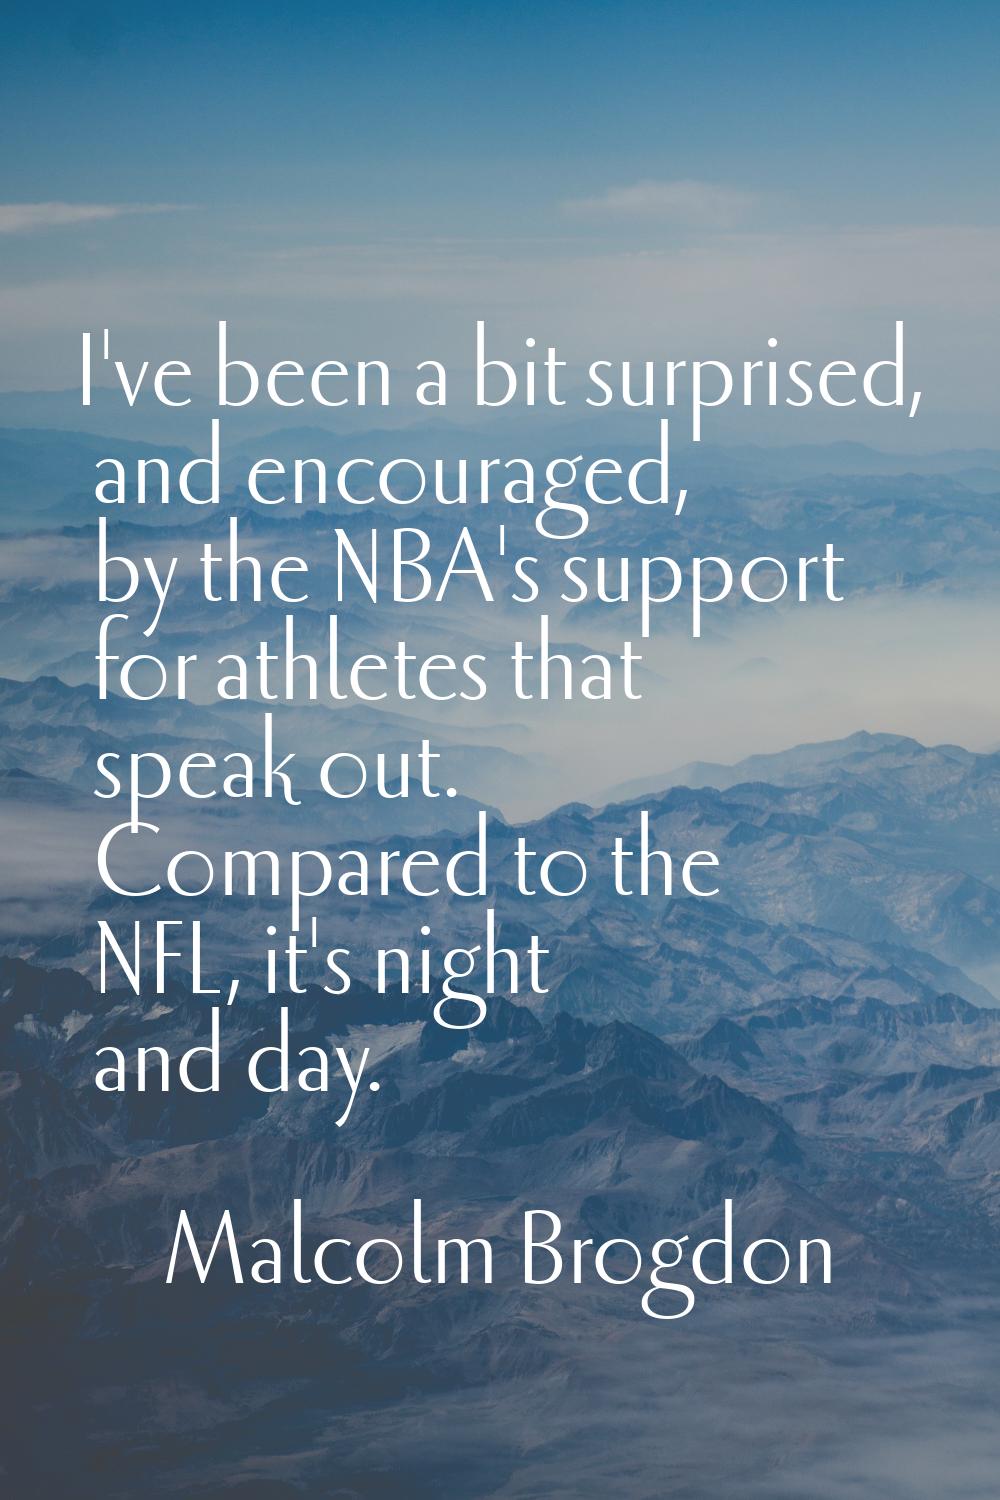 I've been a bit surprised, and encouraged, by the NBA's support for athletes that speak out. Compar